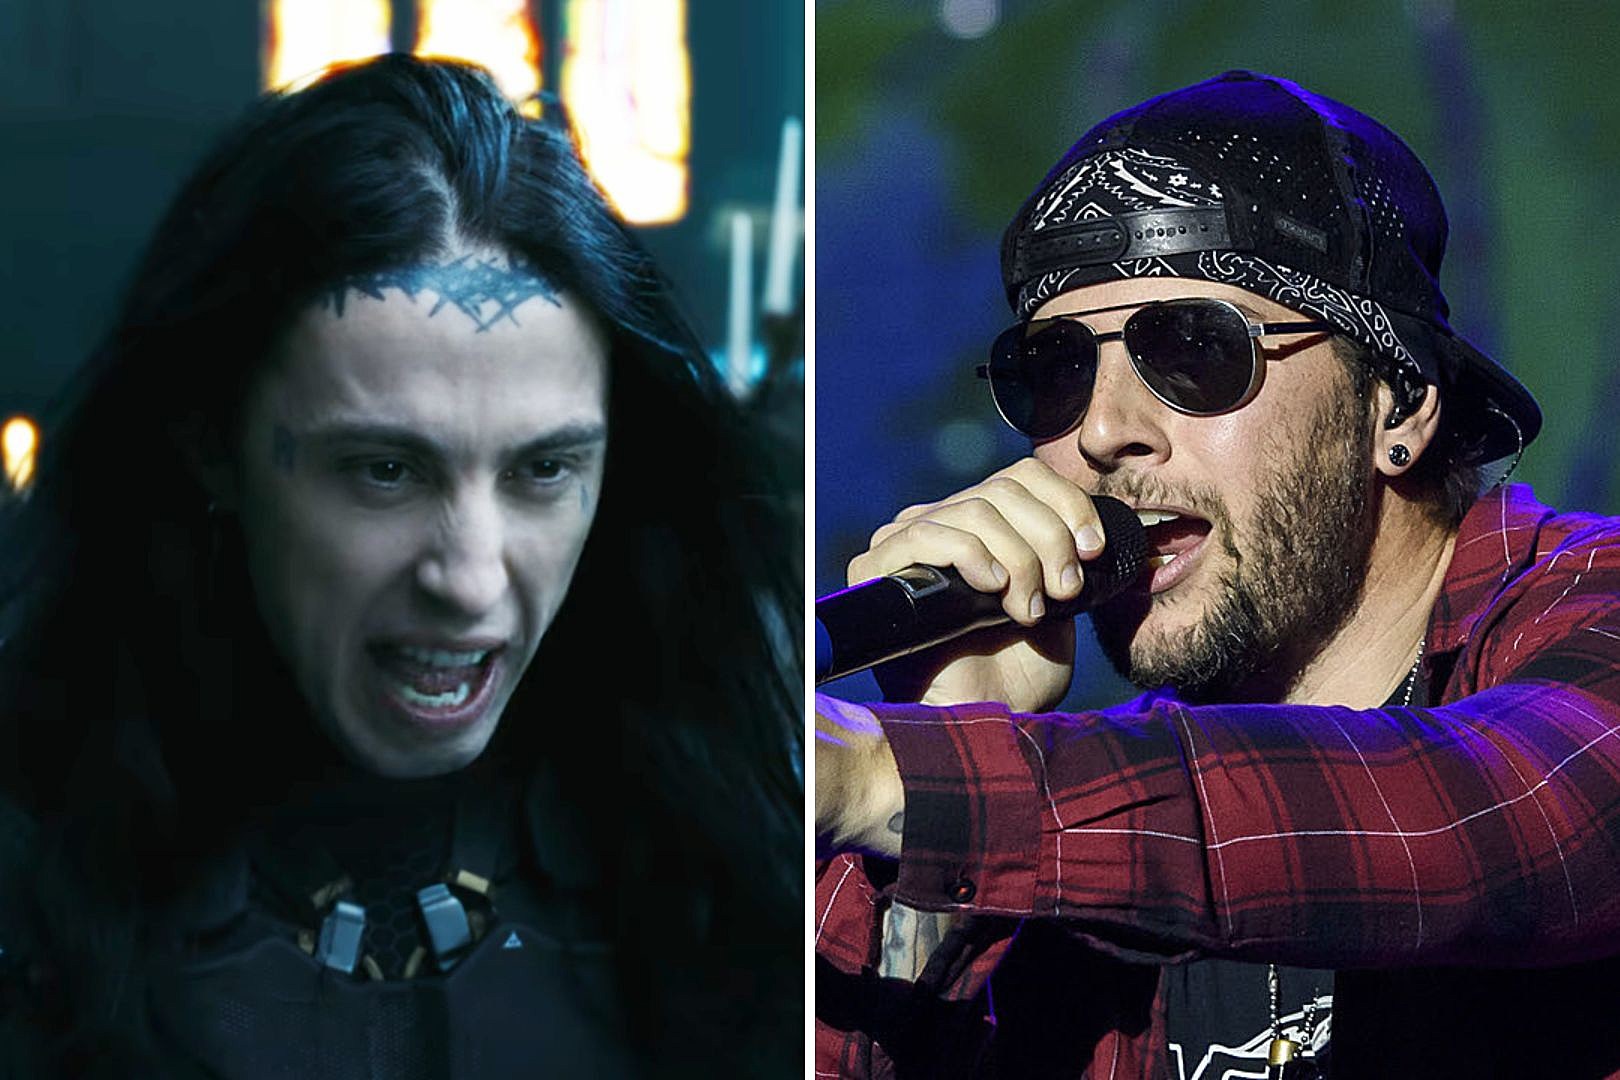 Why Everyone Should Pay Attention to Ronnie Radke, Per M. Shadows